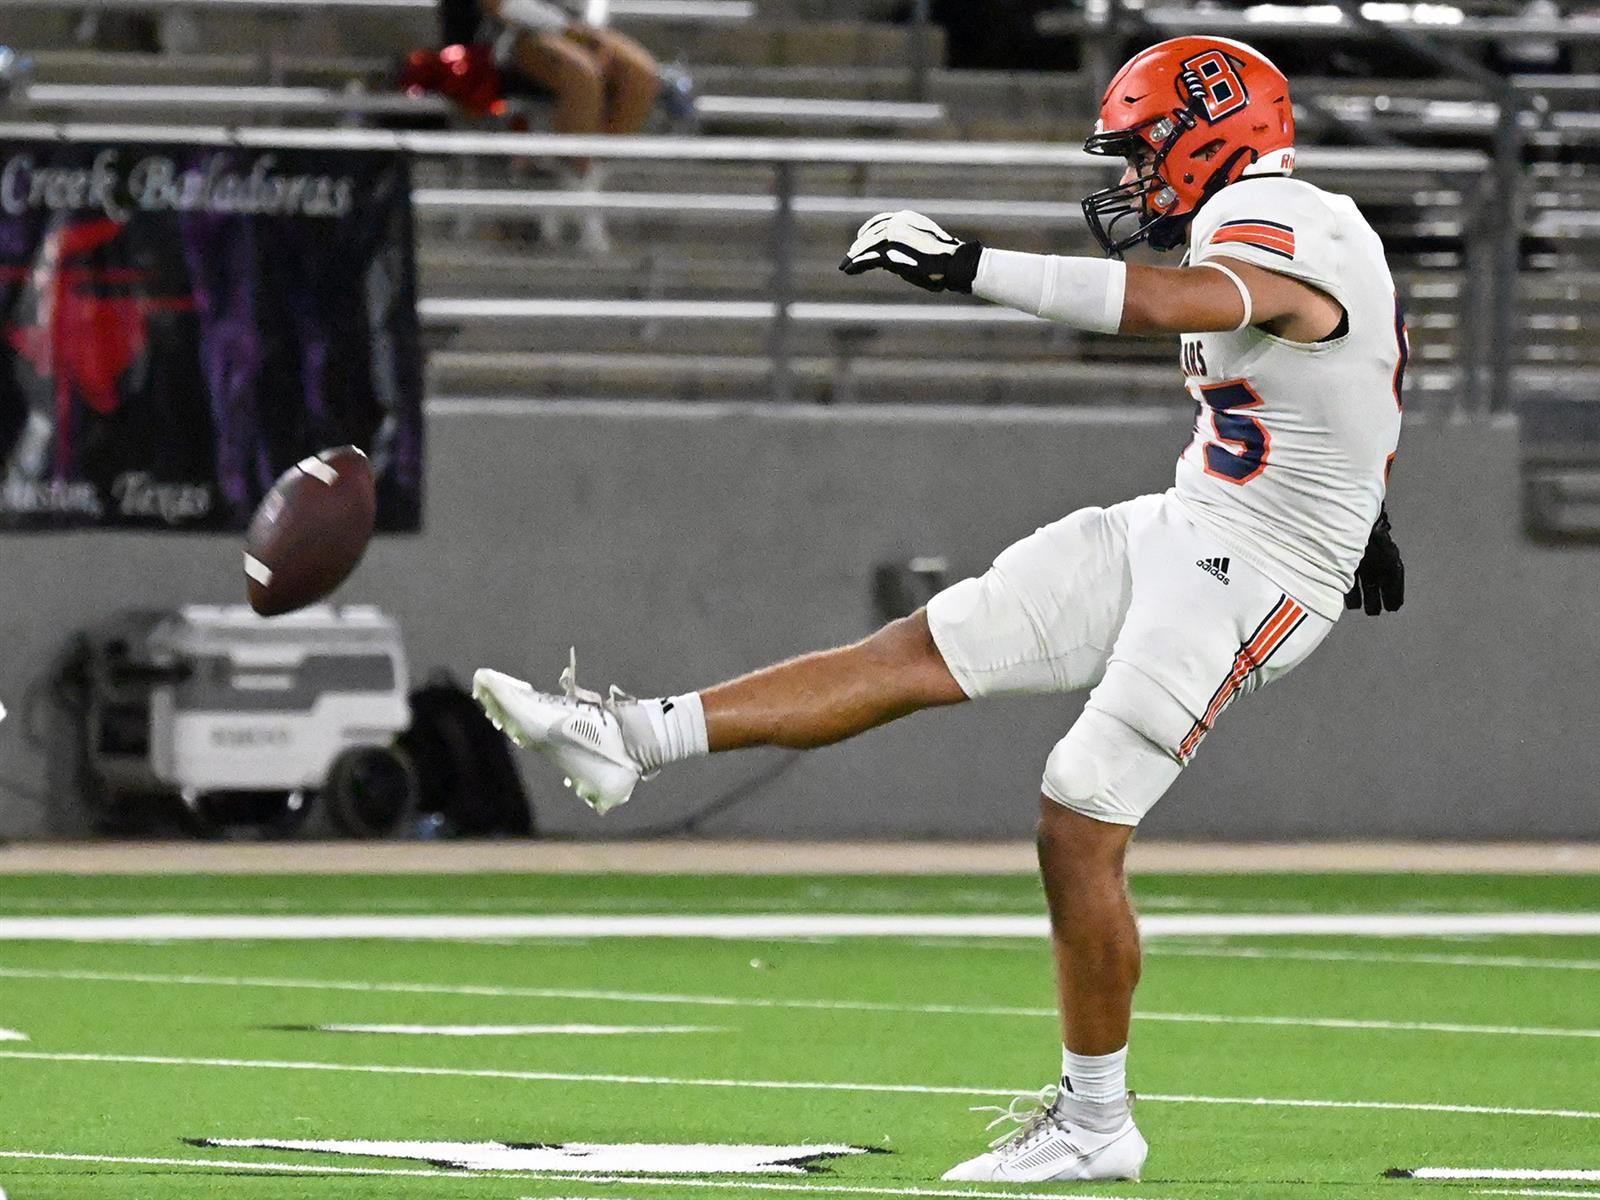 Bridgeland High School junior Vinny Discon was named to the All-District 16-6A football team. Brown was a first-team punter.